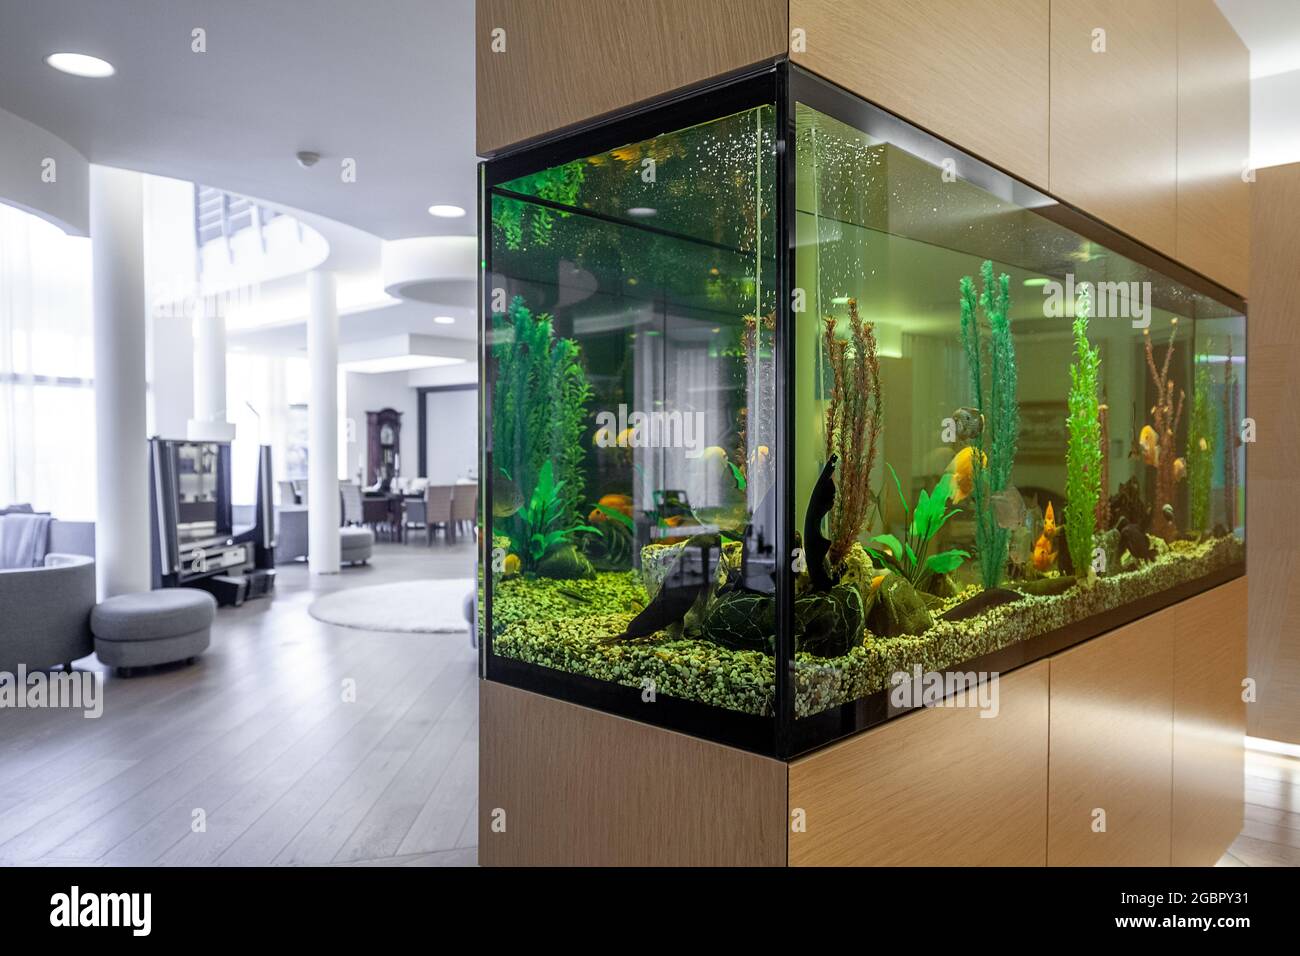 Large built in aquarium with fish and plants in stylish living room Stock Photo